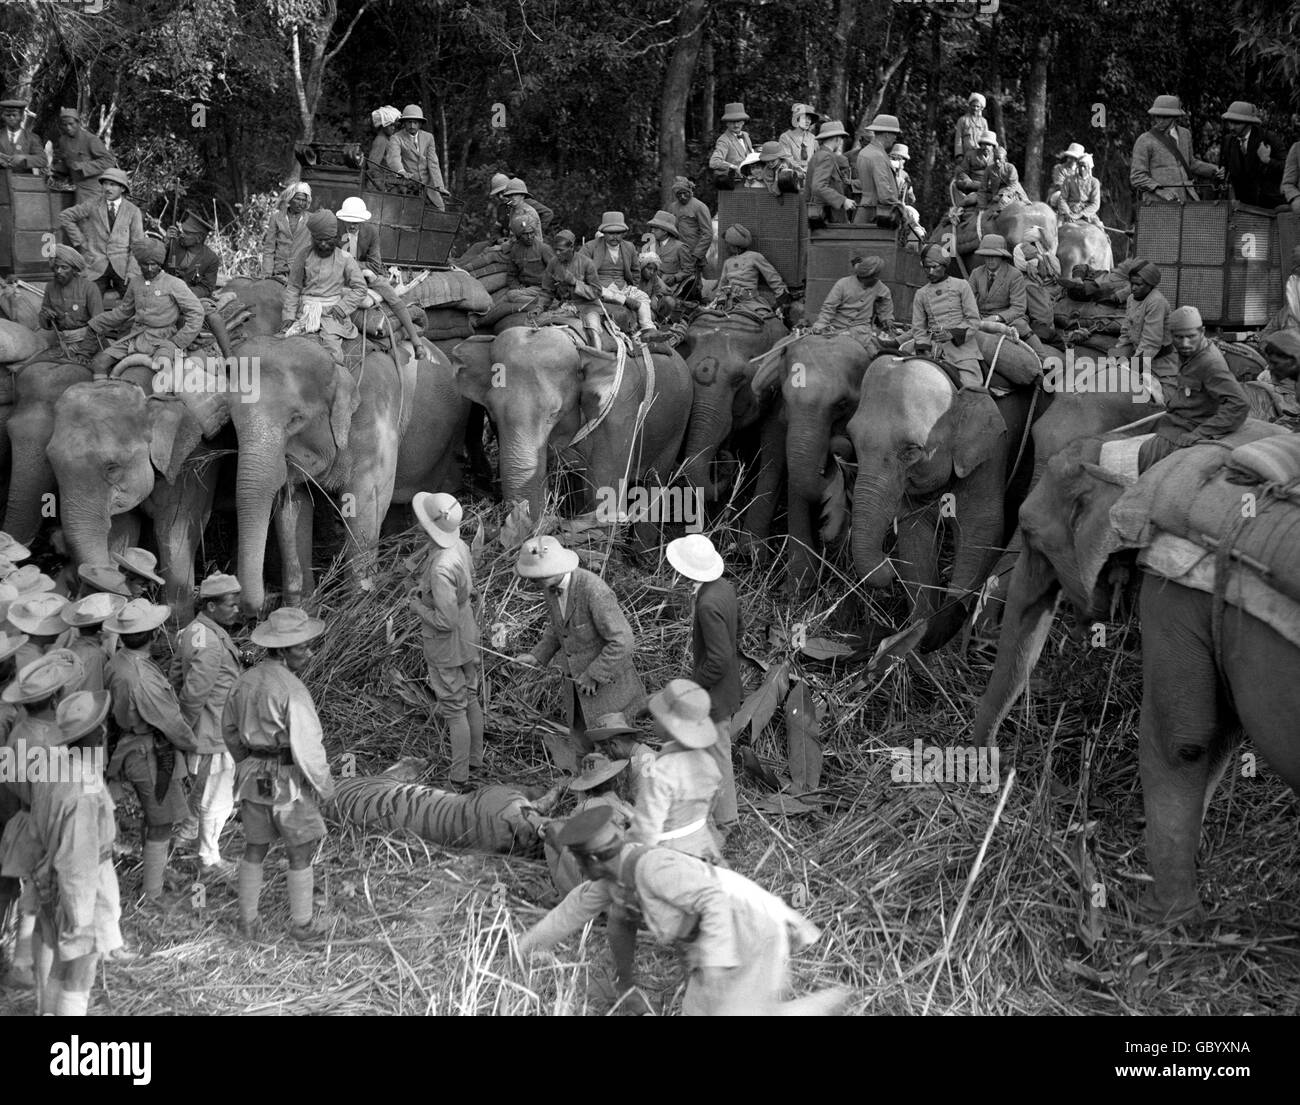 Royalty - Prince Of Wales Indien Tour - 1921 Stockfoto